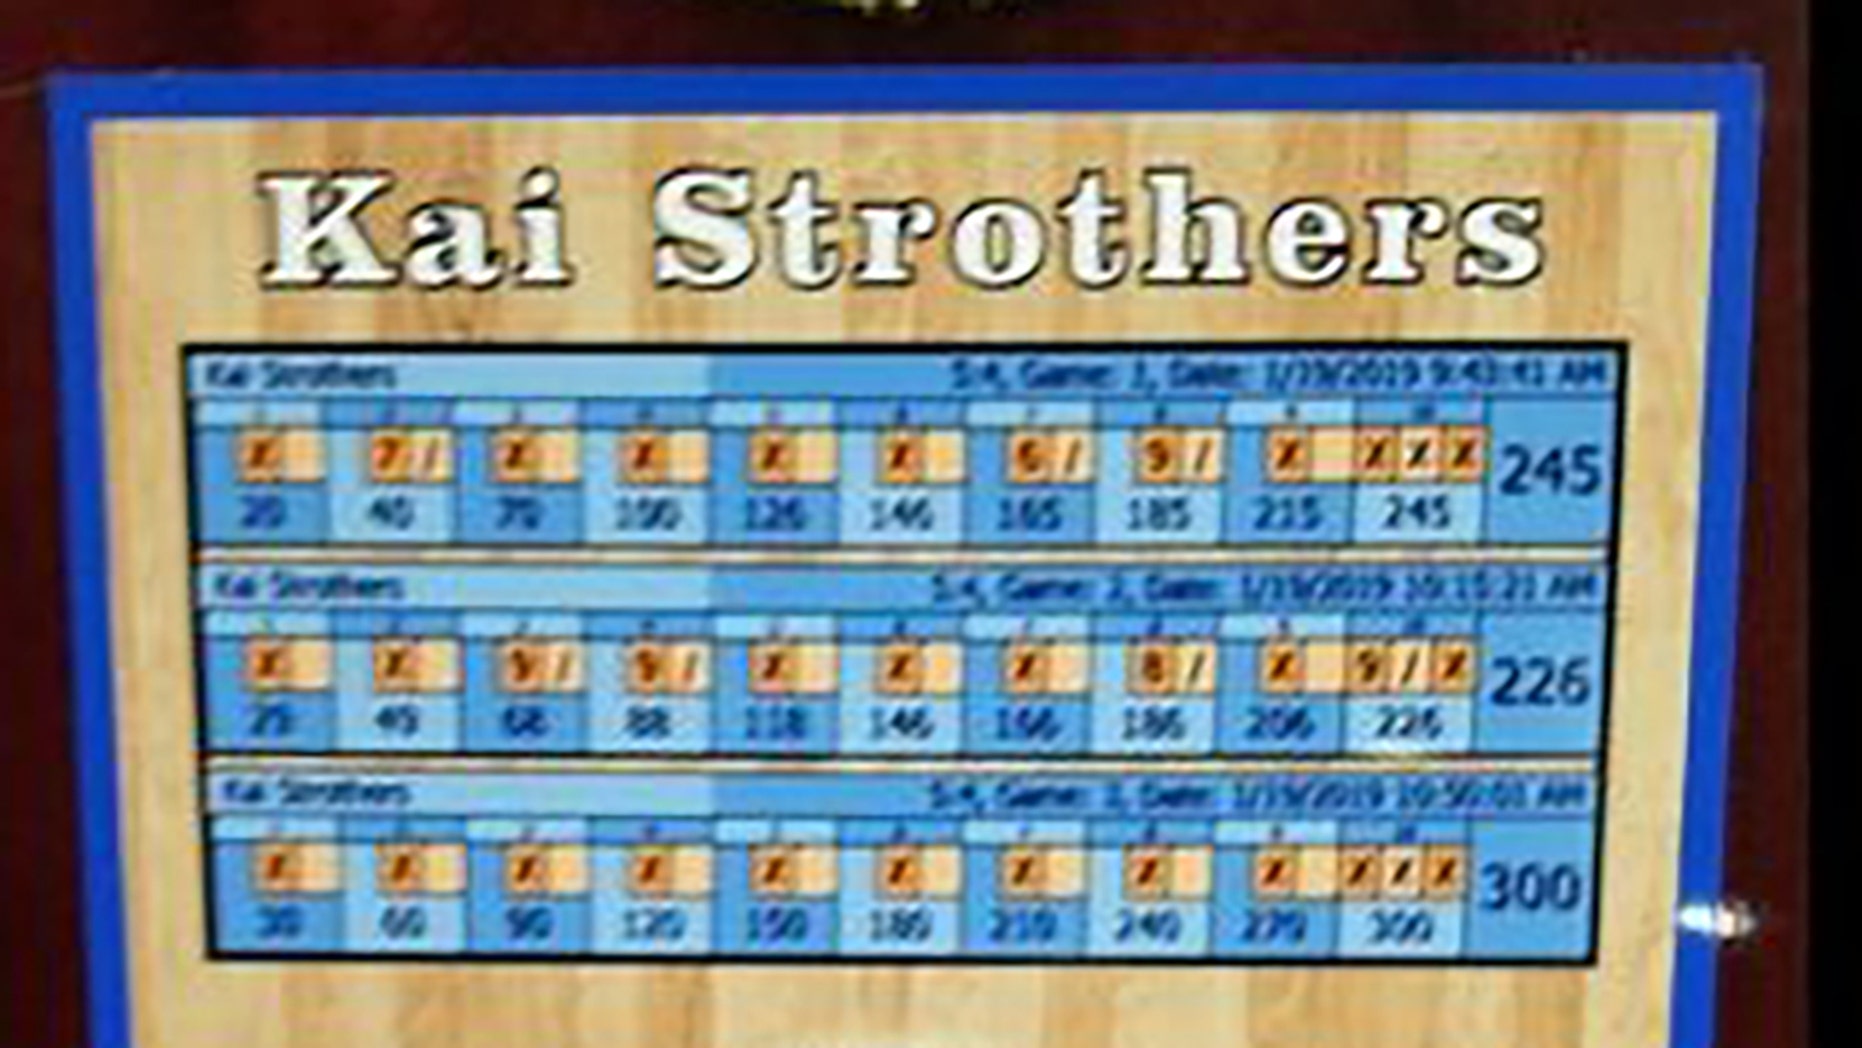 Kid bowler, 10, rolls perfect 300 game: 